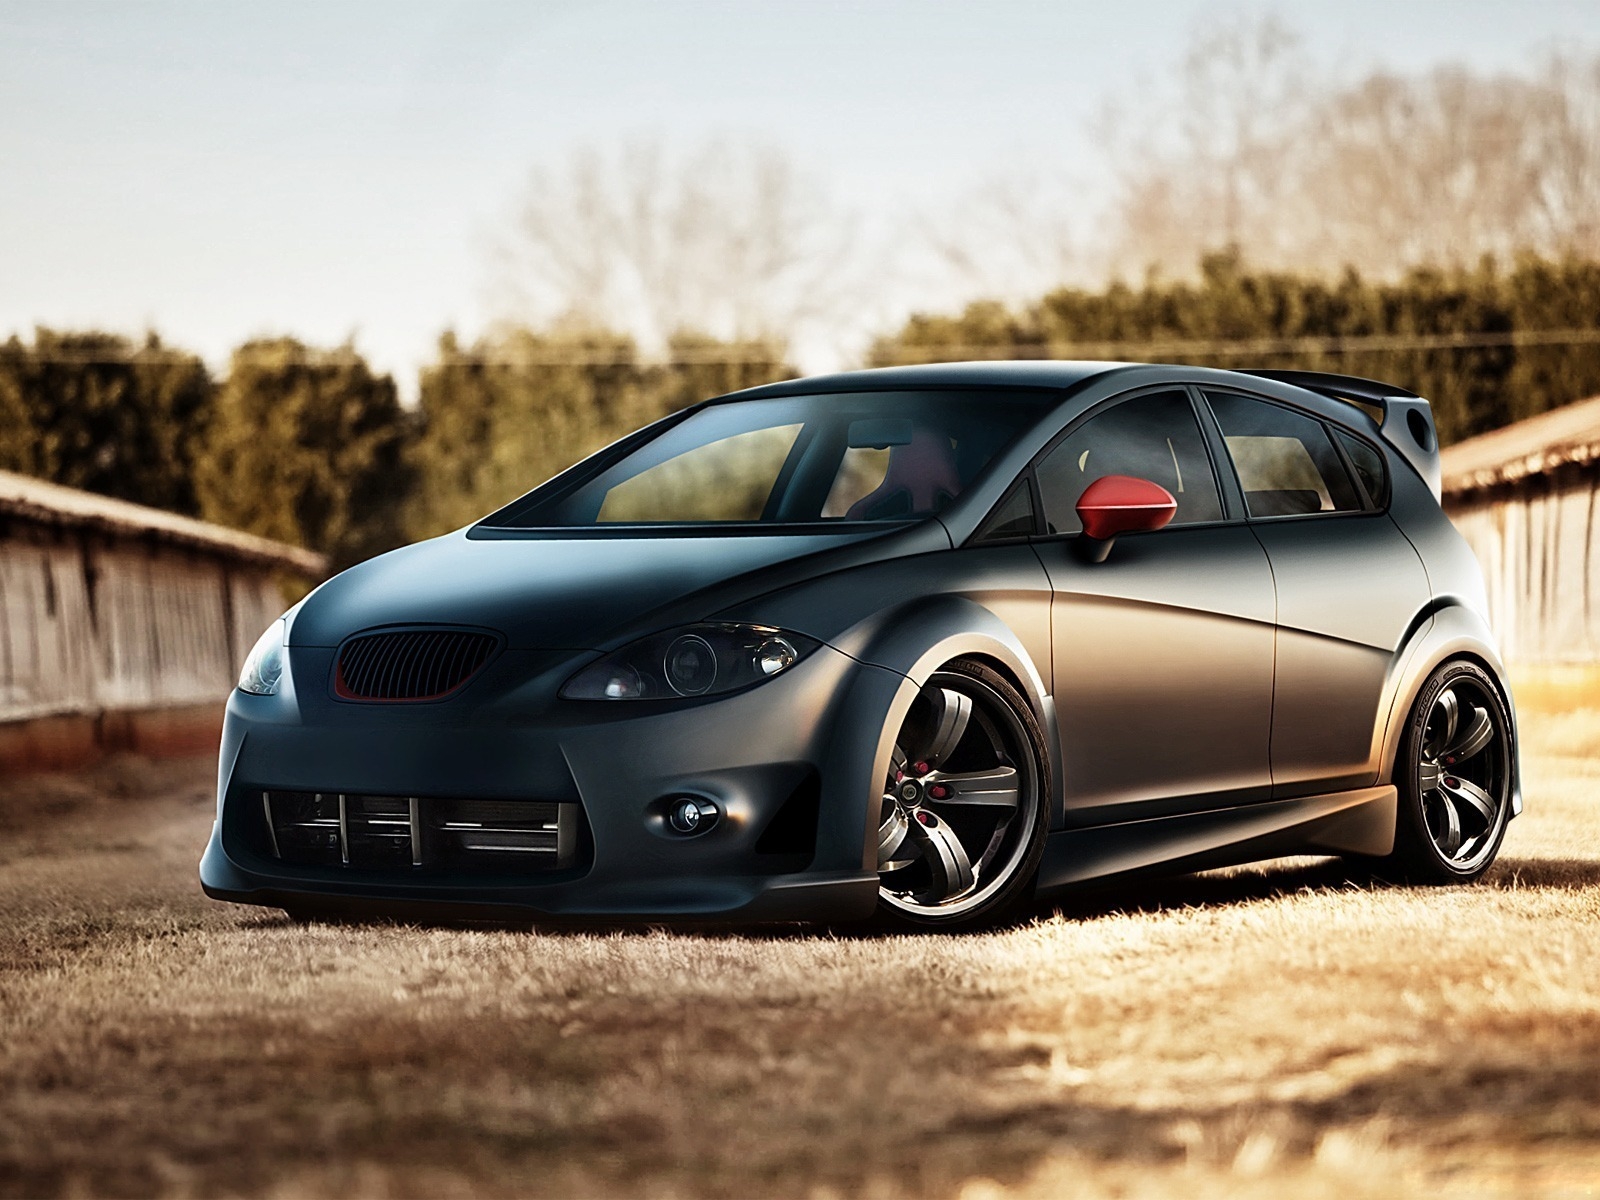 Seat Leon Tunning Front Angle for 1600 x 1200 resolution